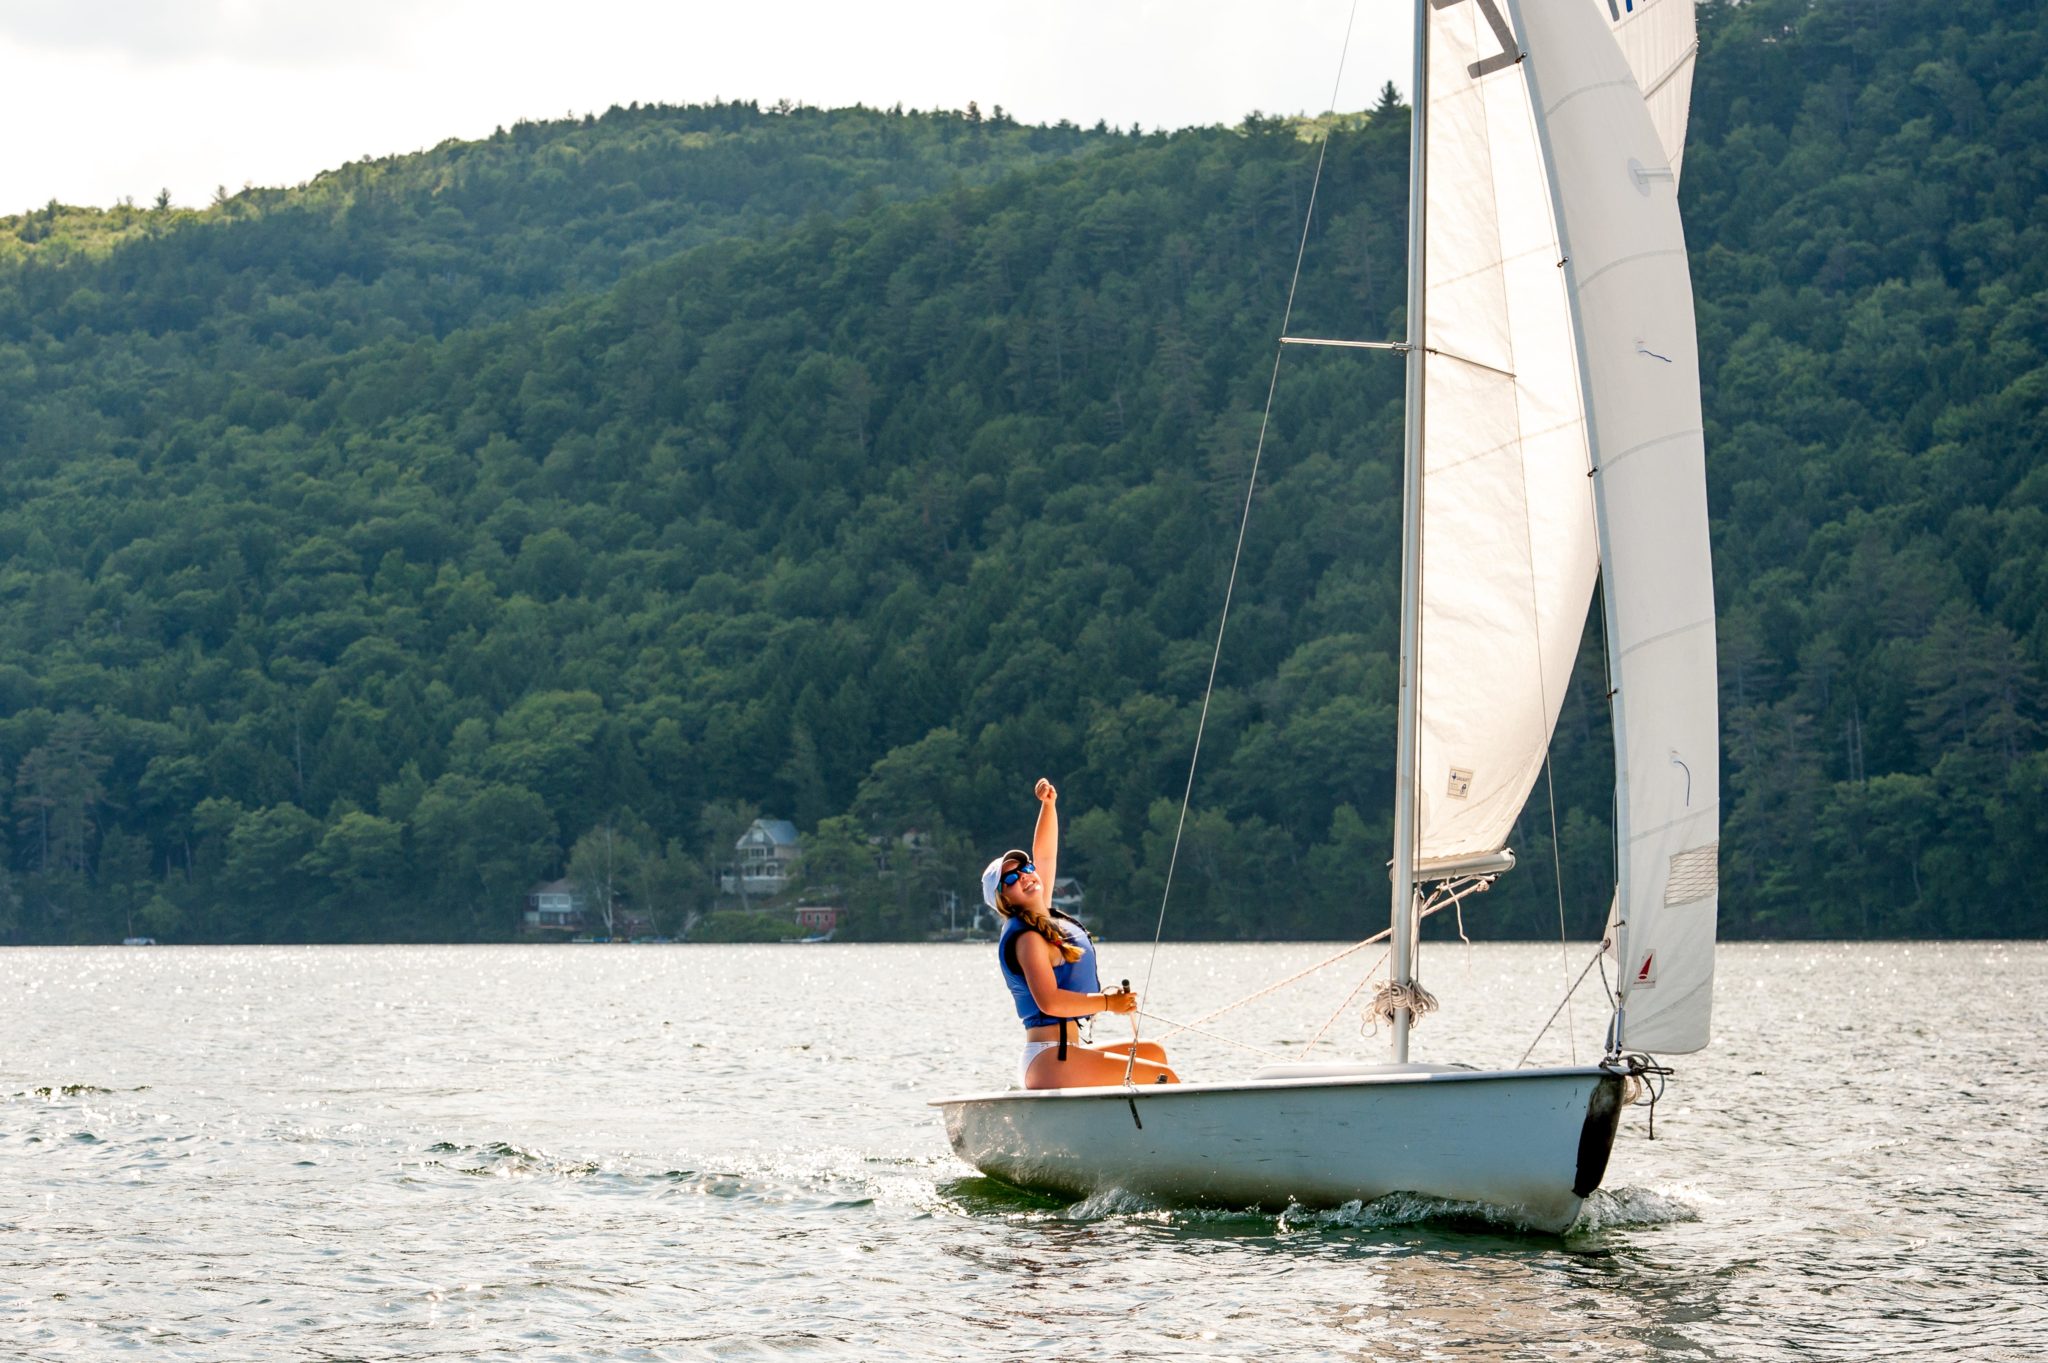 An Aloha camper with their fist in the air as they solo a sailboat on the lake.